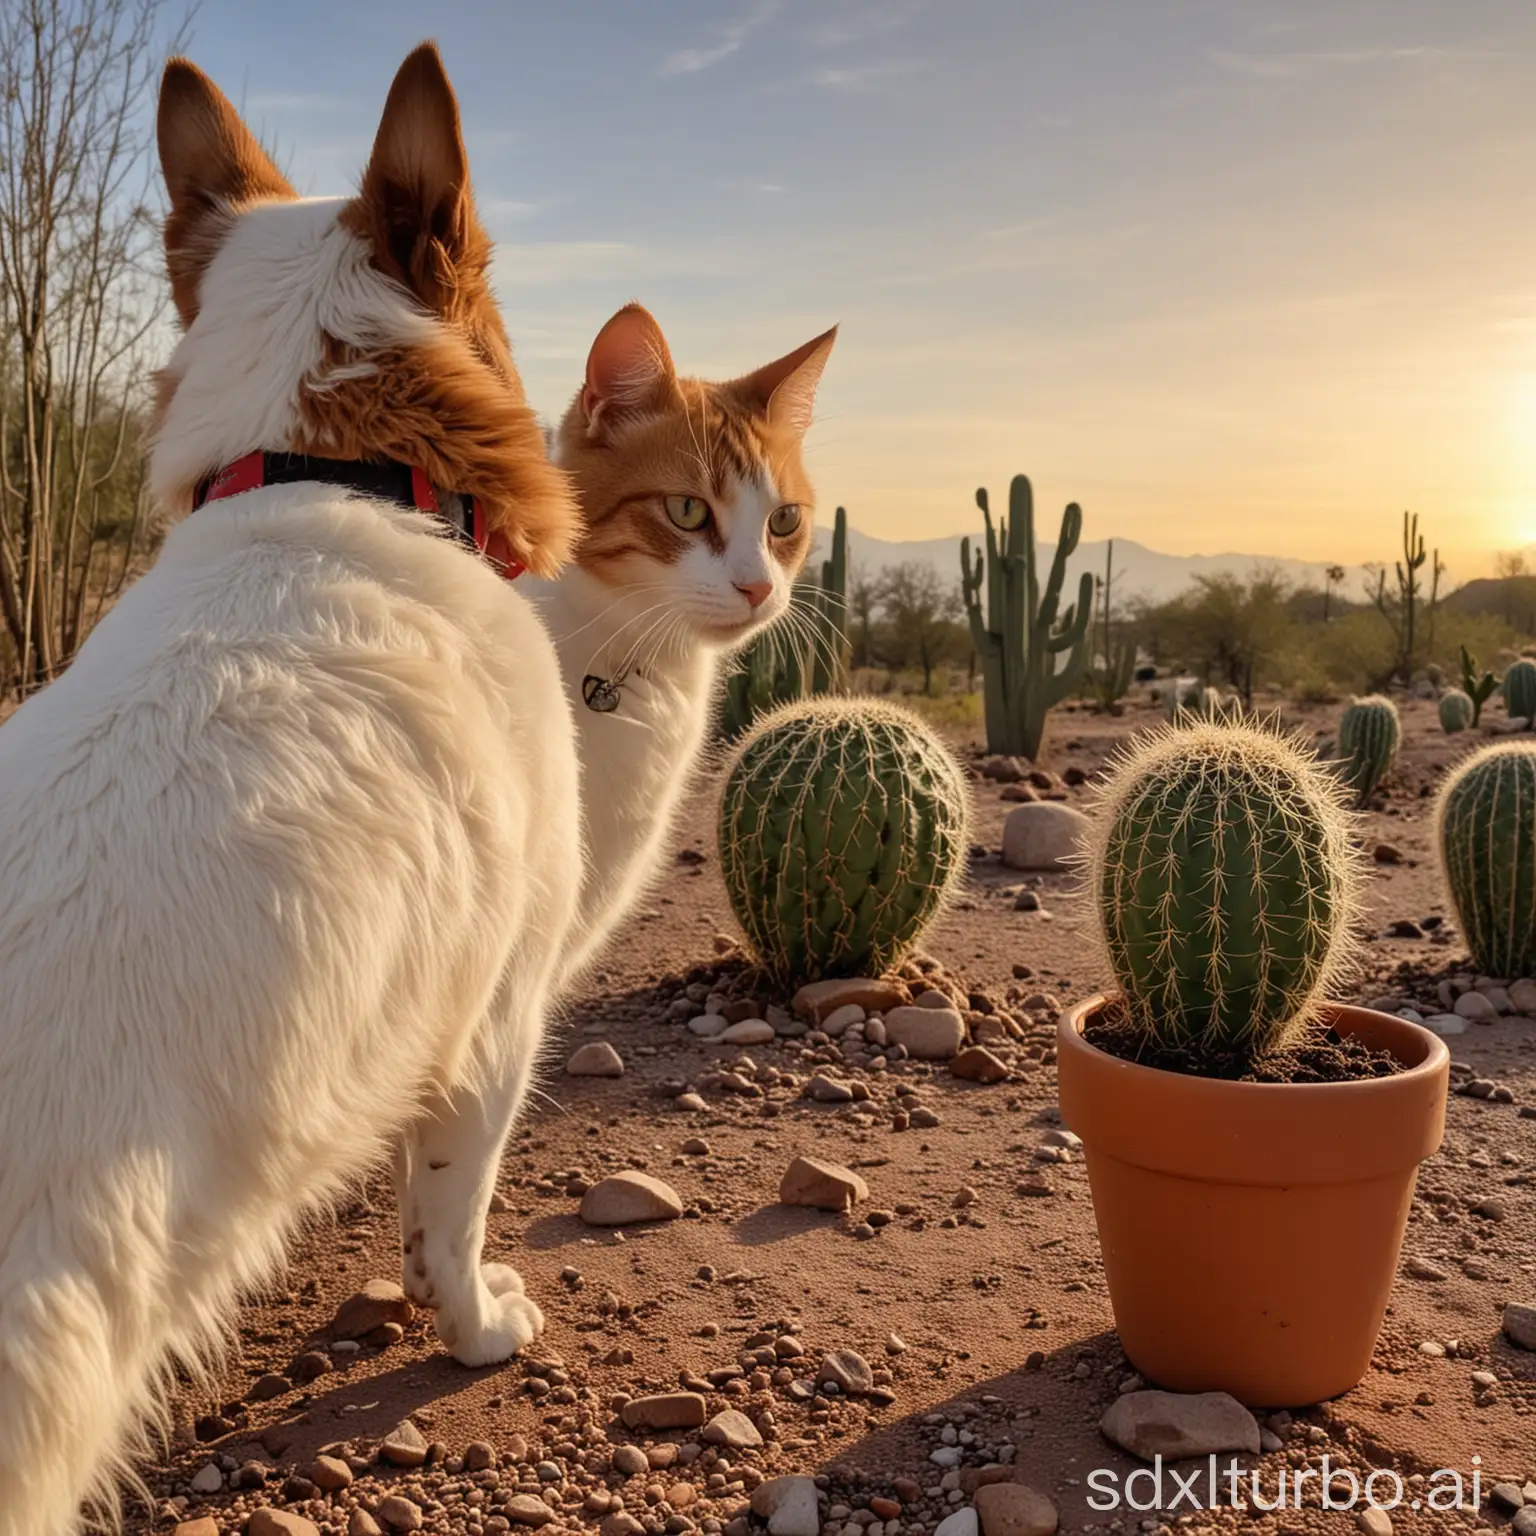 Curious-Dog-Ignored-by-Cat-with-Cactus-Pot